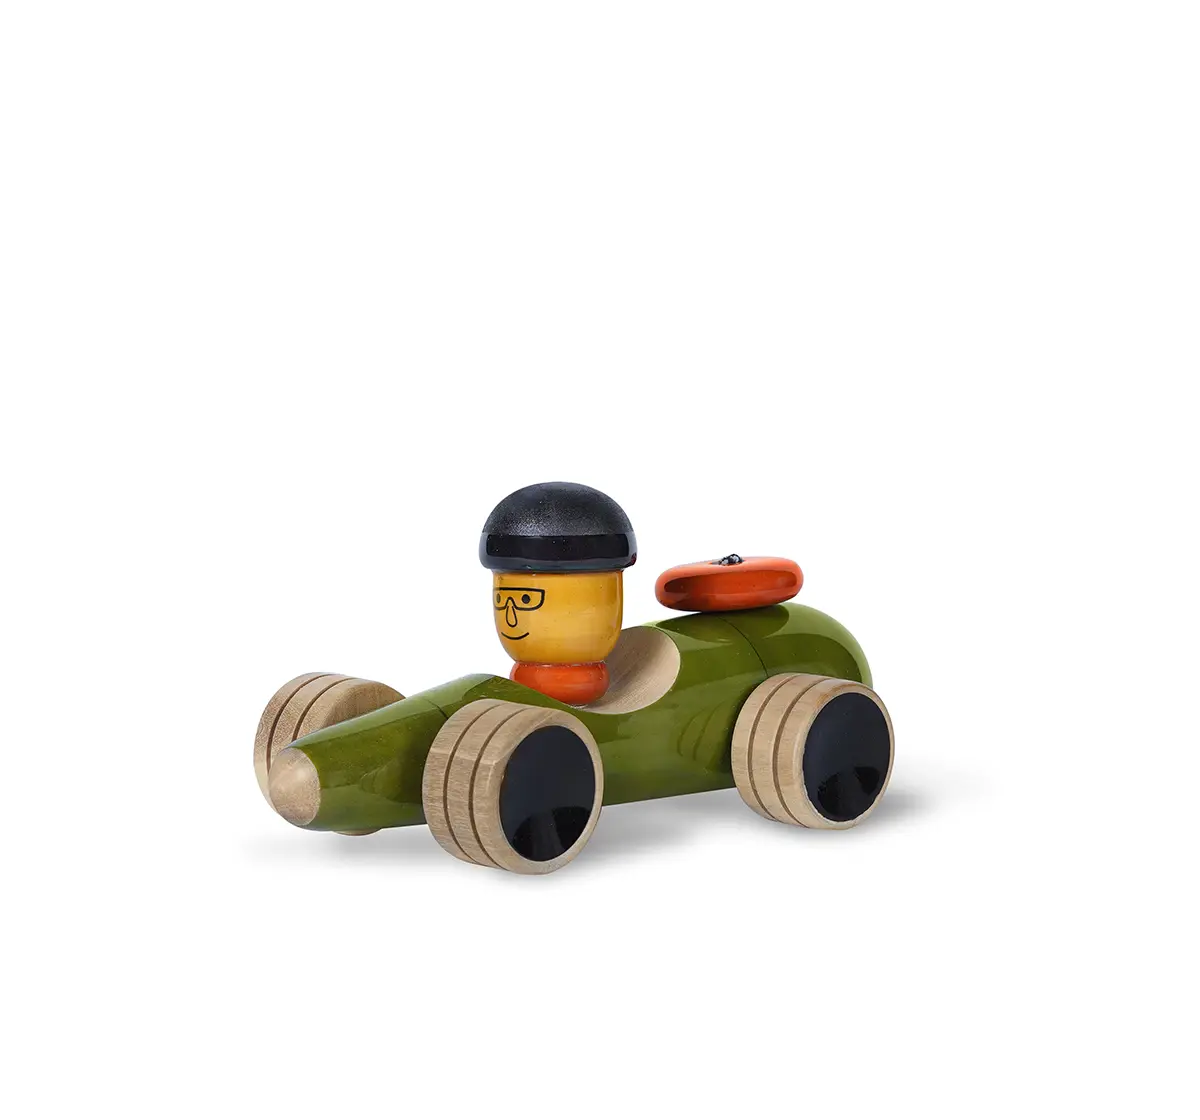 Folktales Handmade Wooden Vroom Toy 3 Wooden Toys for Kids age 1Y+ (Green)